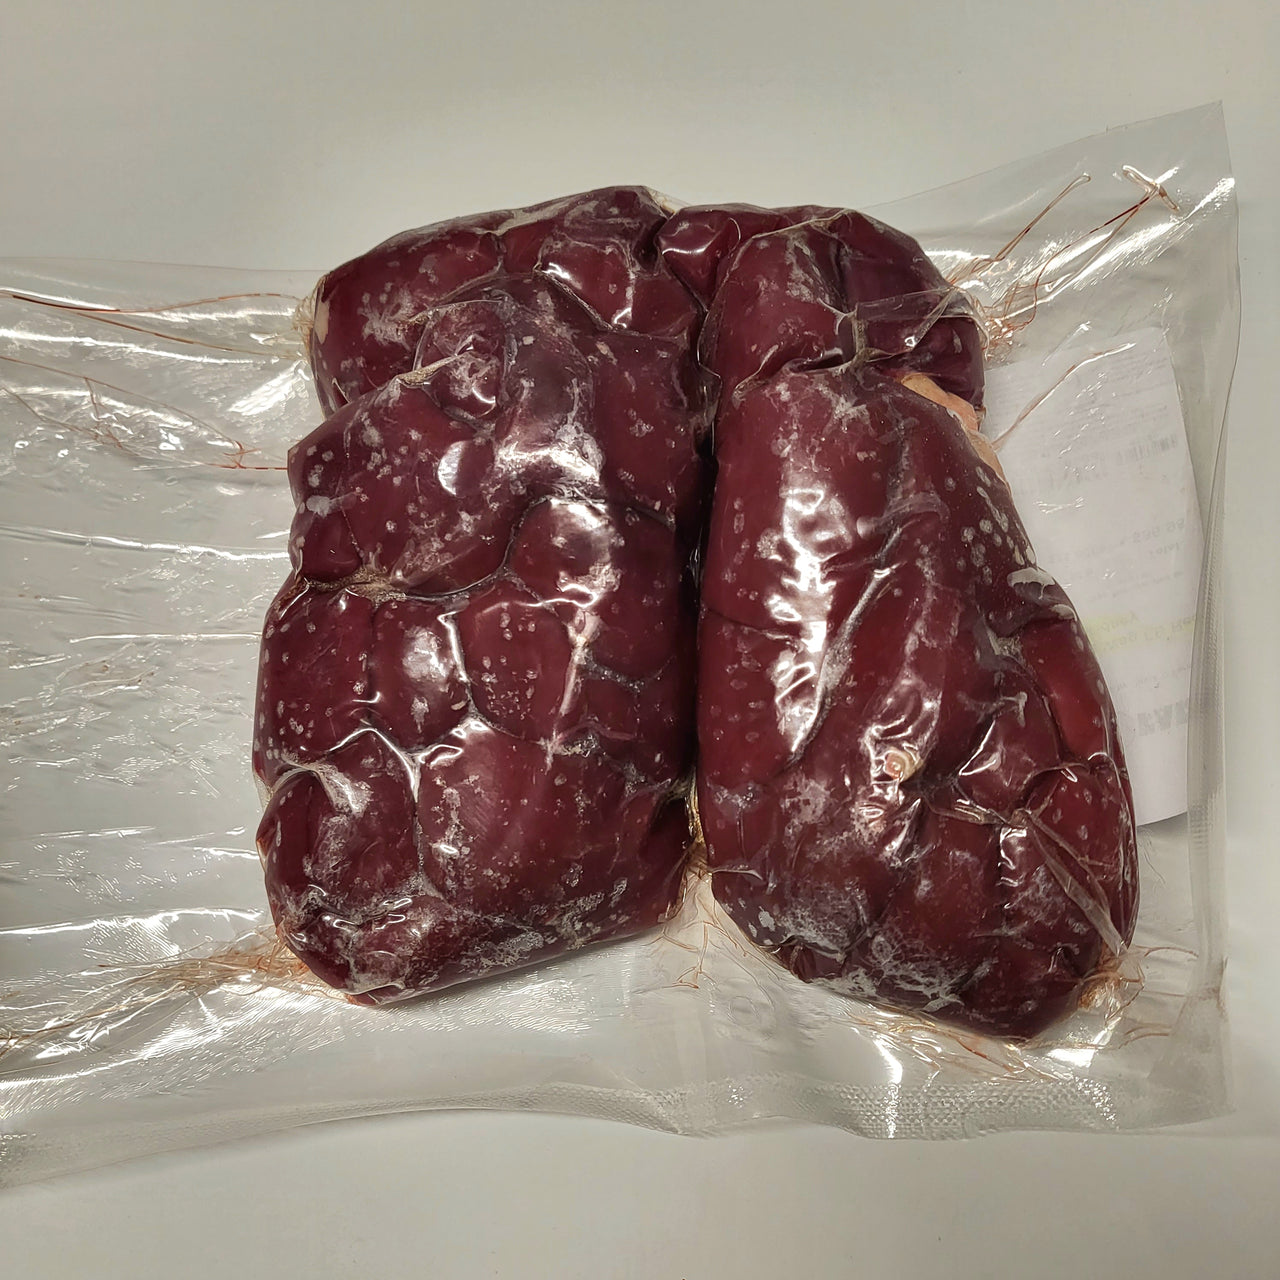 Grass Fed Grass Finished Beef Kidney Japanese Black Wagyu NOT AGED